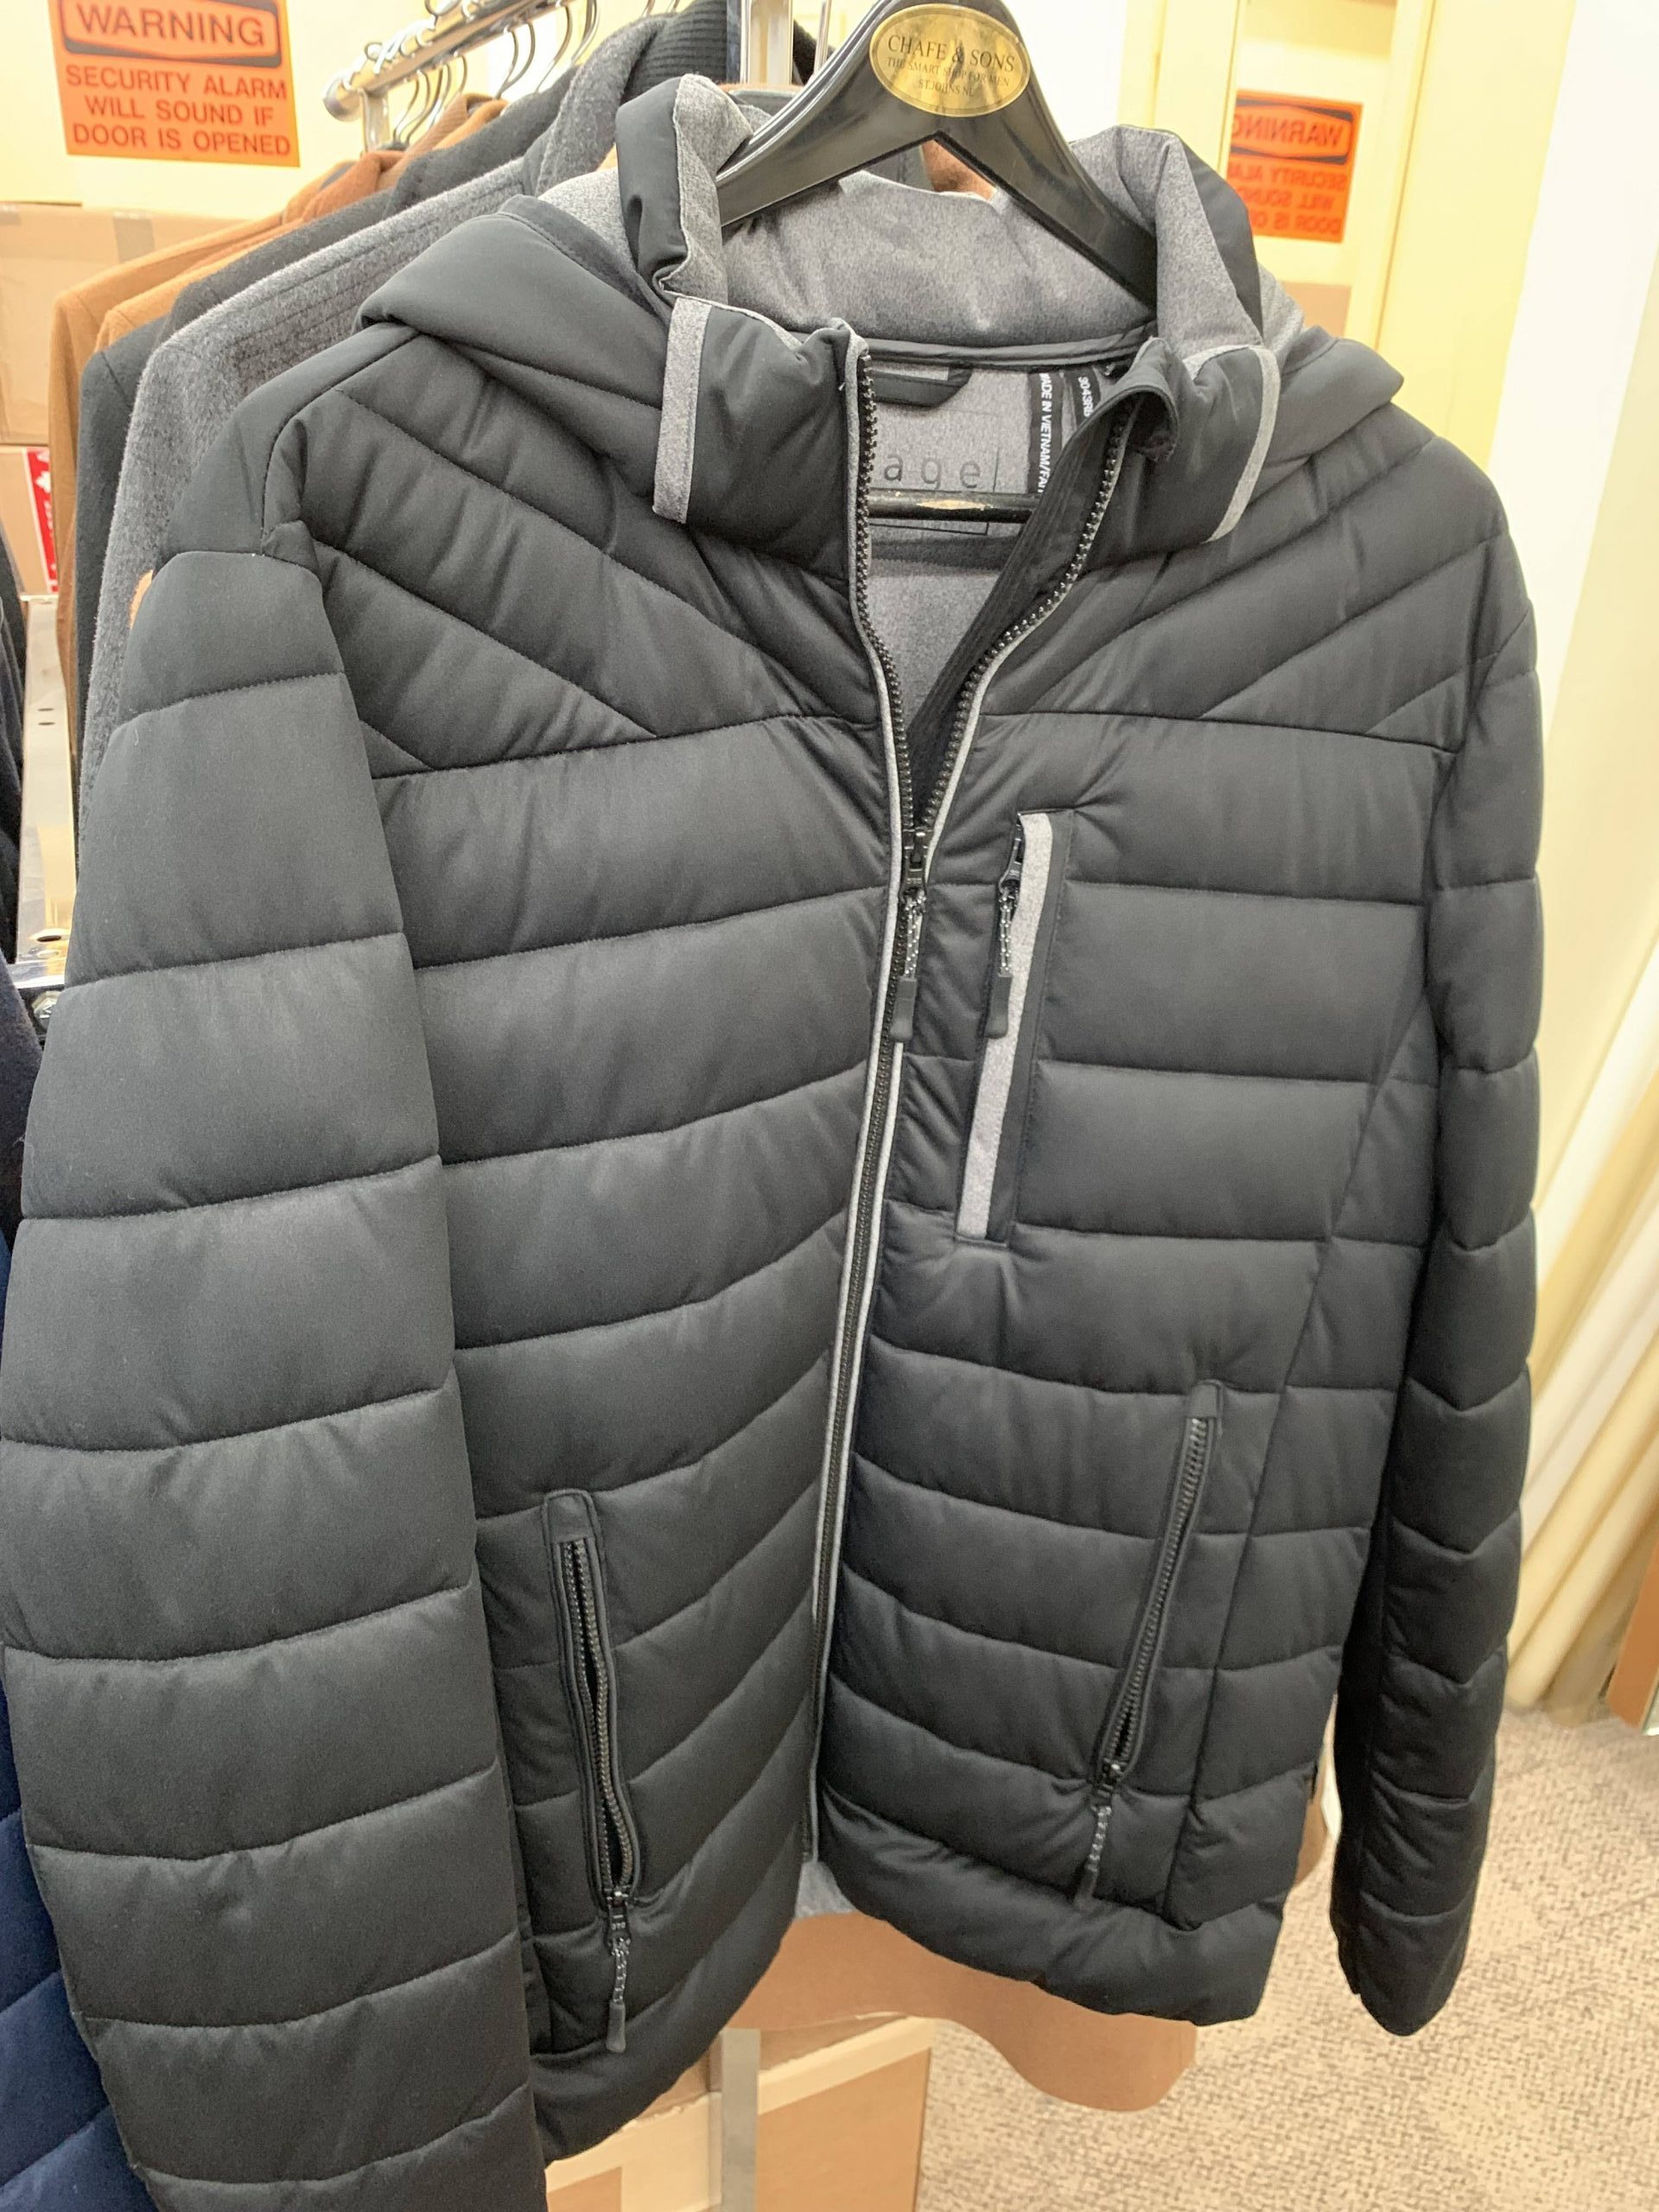 Nuage Quilted Puffer Jacket for Men - Wm. L Chafe & Sons